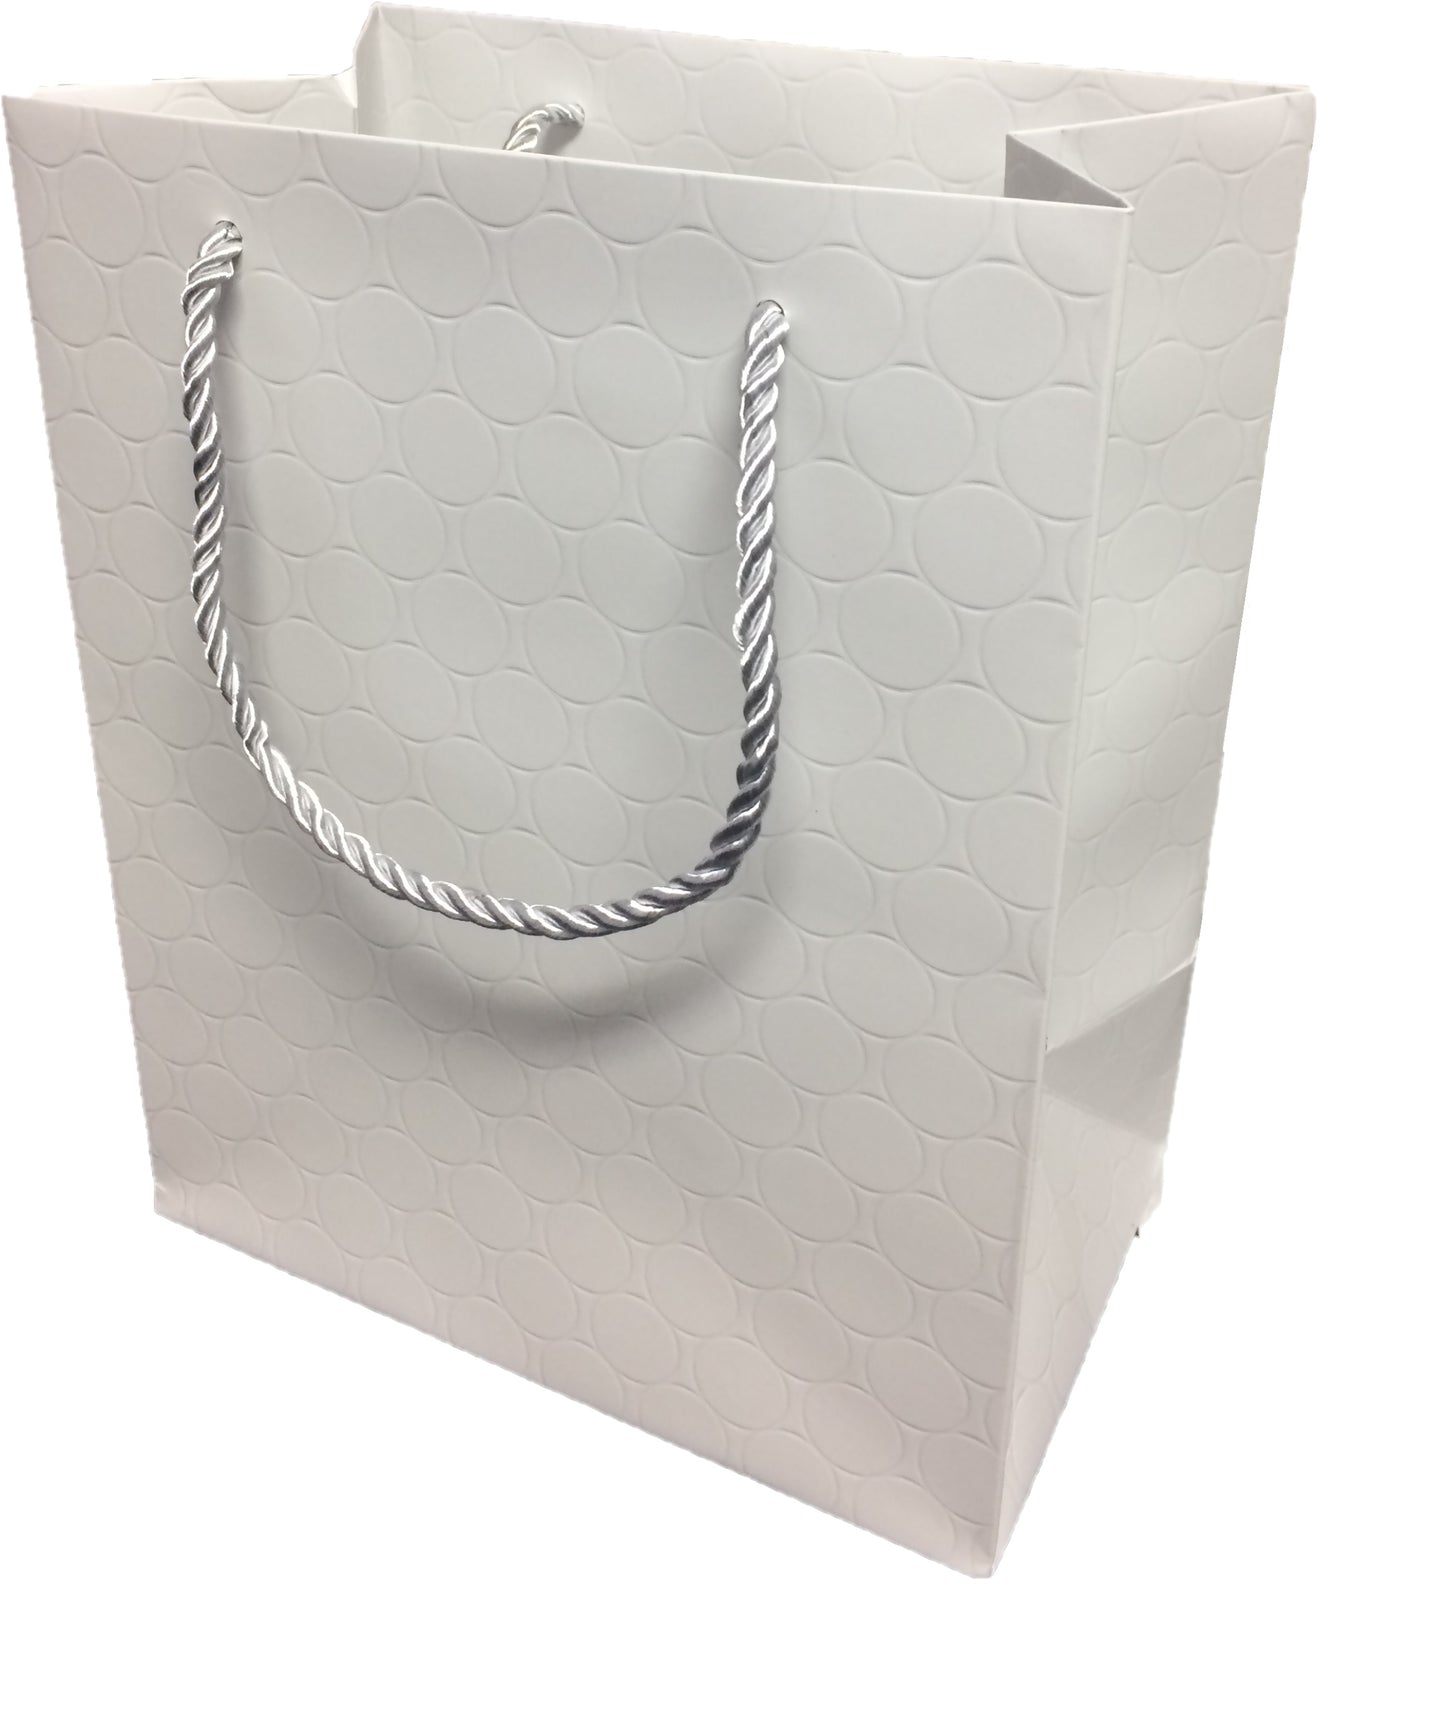 White Gift Bags with Handles Medium Size 8x10 Wedding Bags with Silver Handles 12 Bags Pure White Paper Shopping Bags 8x5x10